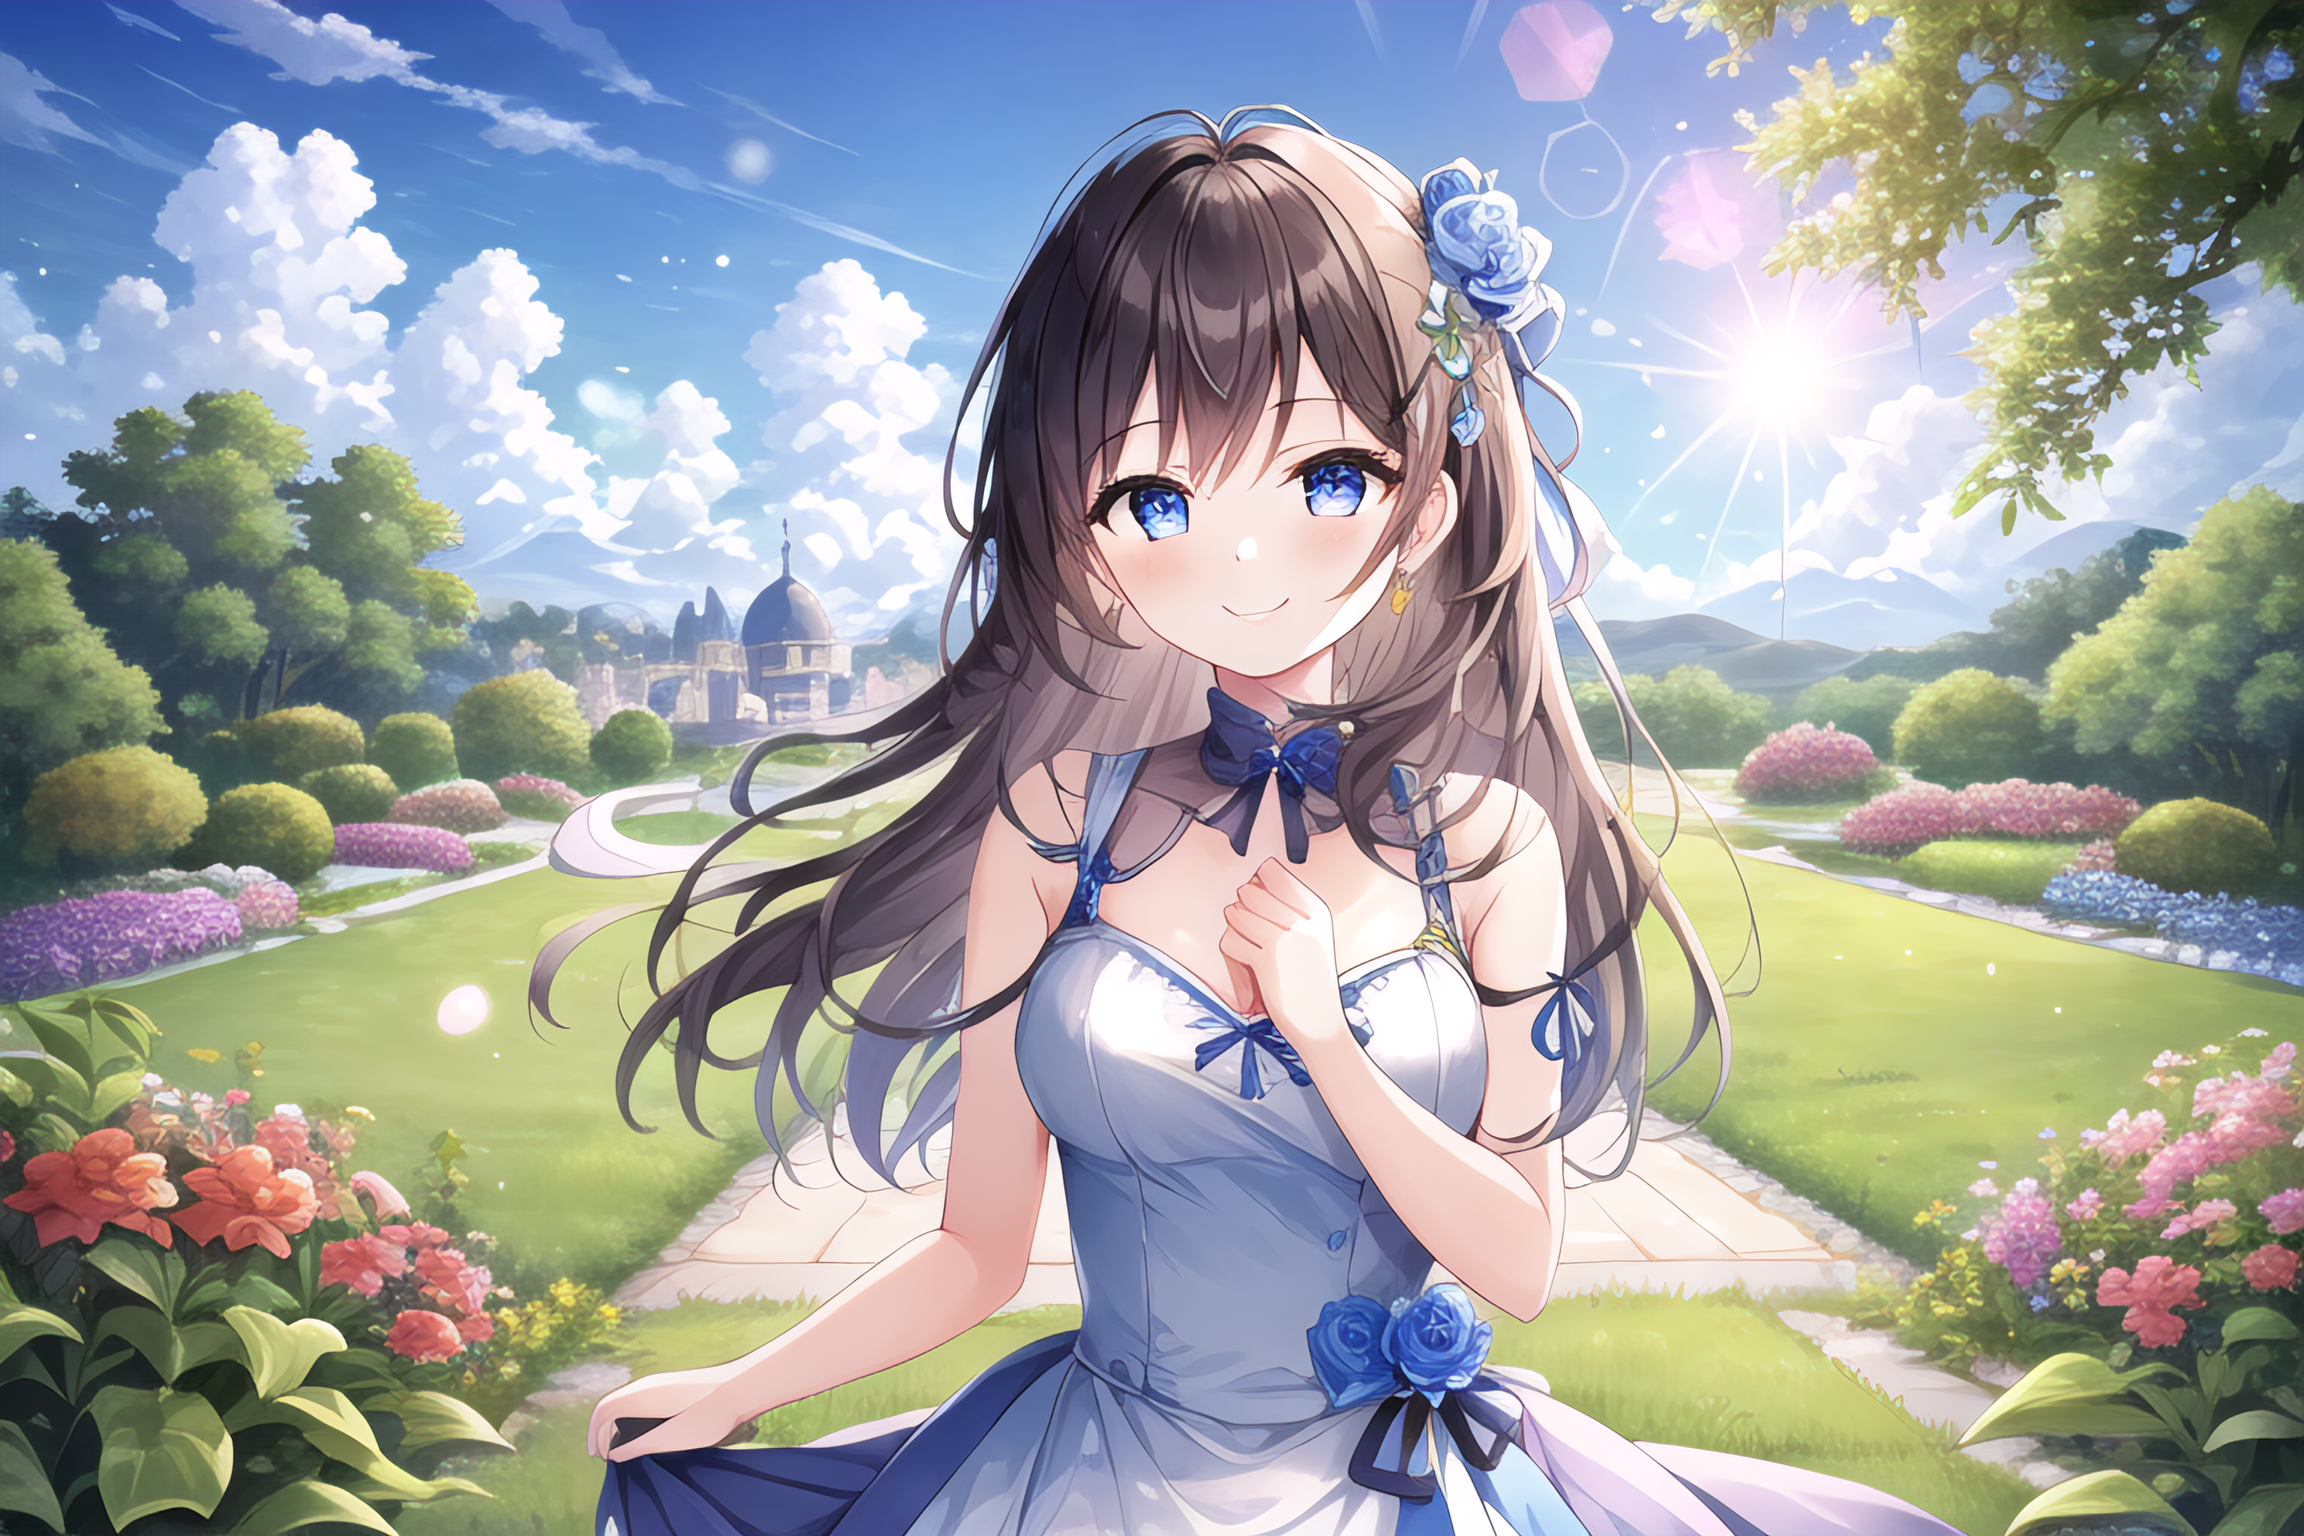 Anime 2304x1536 anime anime girls Stable Diffusion AI art artwork digital art smiling looking at viewer flowers grass clouds Sun sunlight flower in hair dress lifting dress trees